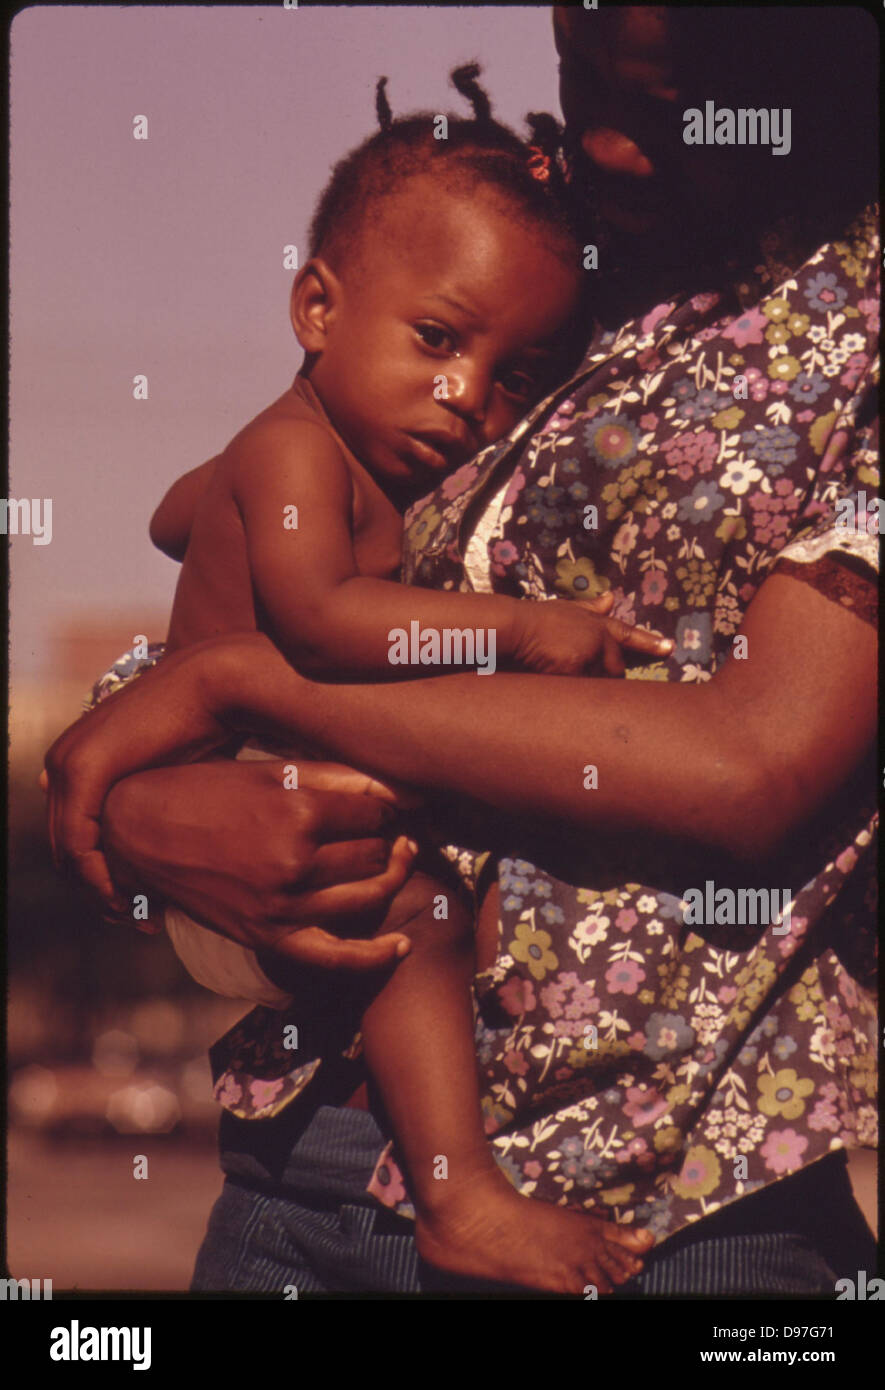 A South Side Chicago Ghetto Mother And Child Who Live In Nearby Low Income Housing, 06/1973 Stock Photo